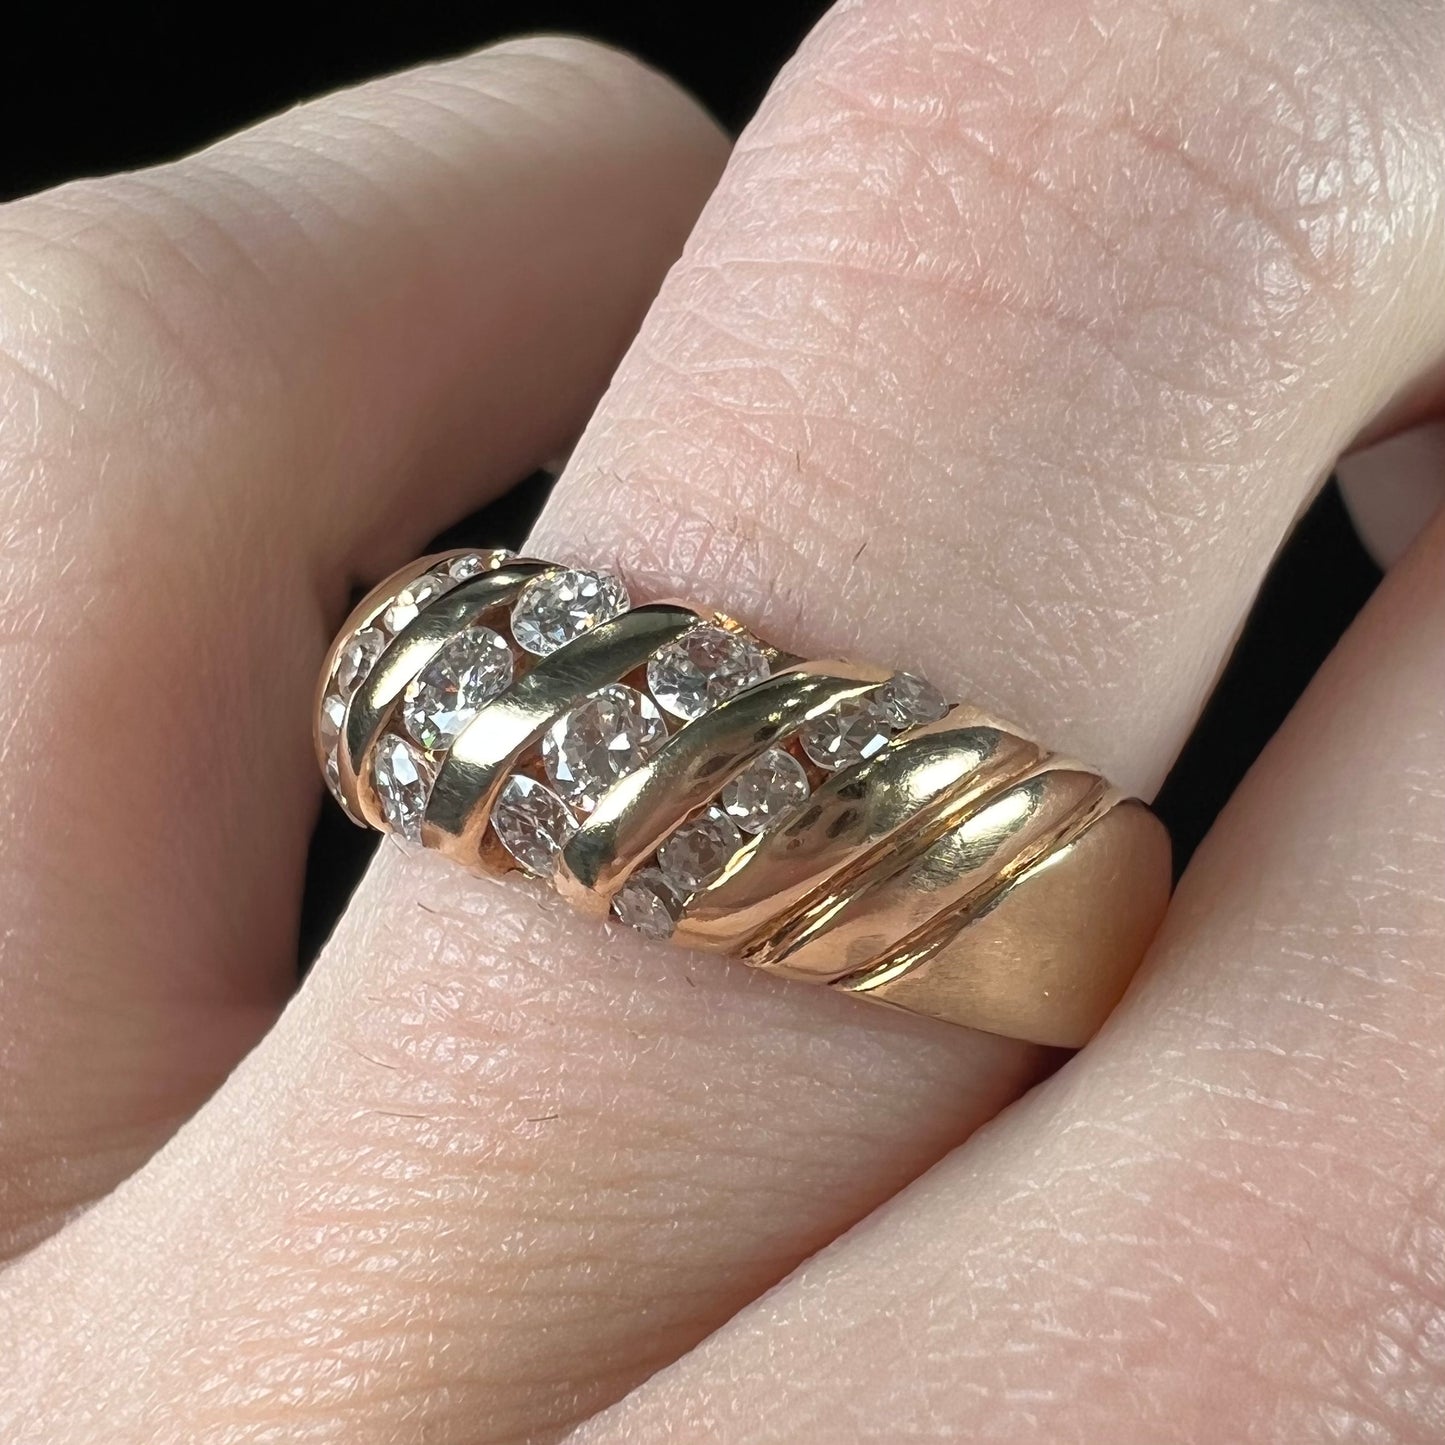 A ladies' channel set gold diamond ring.